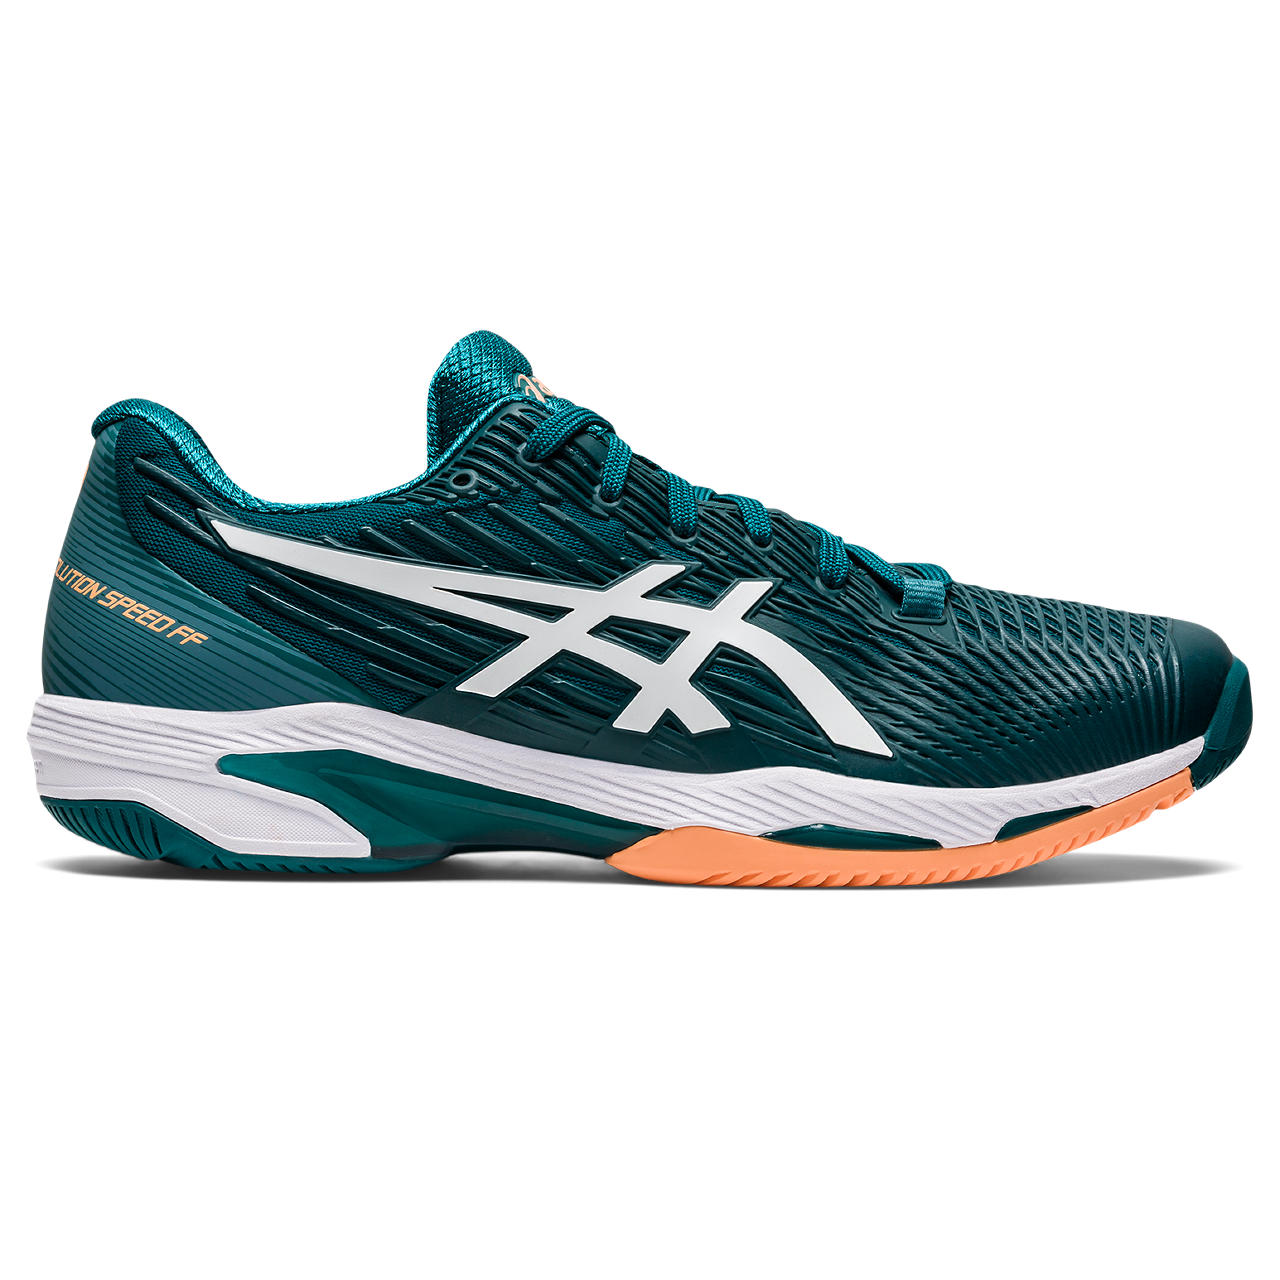 Lateral view of the Men's Solution Speed FF 2 tennis shoe by ASIC in the color Velvet Pine/White